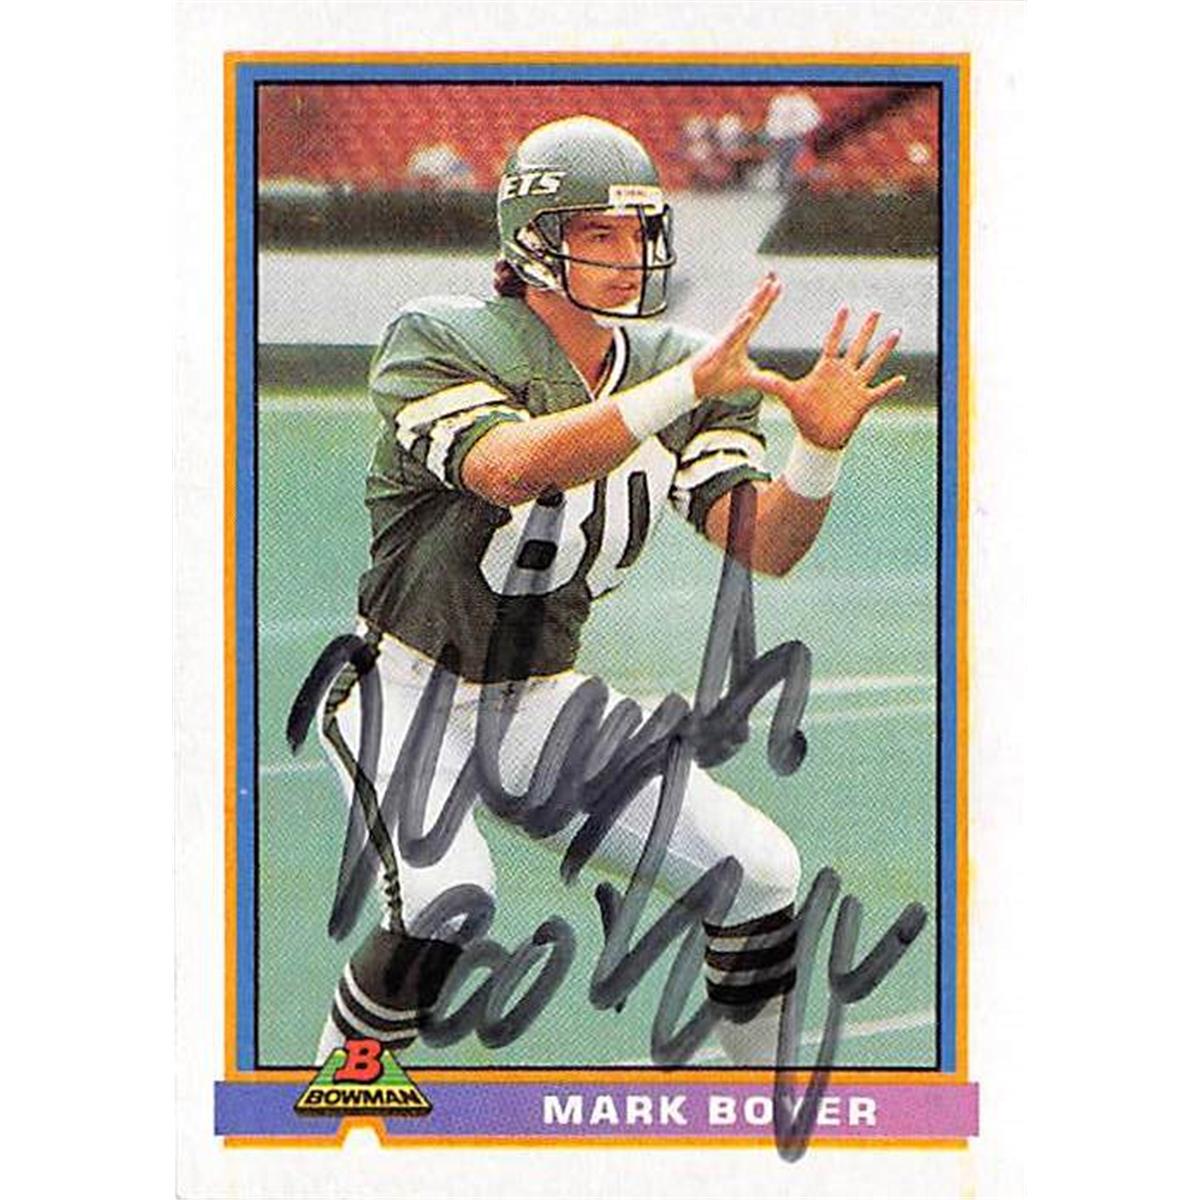 Picture of Autograph Warehouse 443988 New York Jets 1991 Topps Bowman 387 Mark Boyer Autographed Football Card